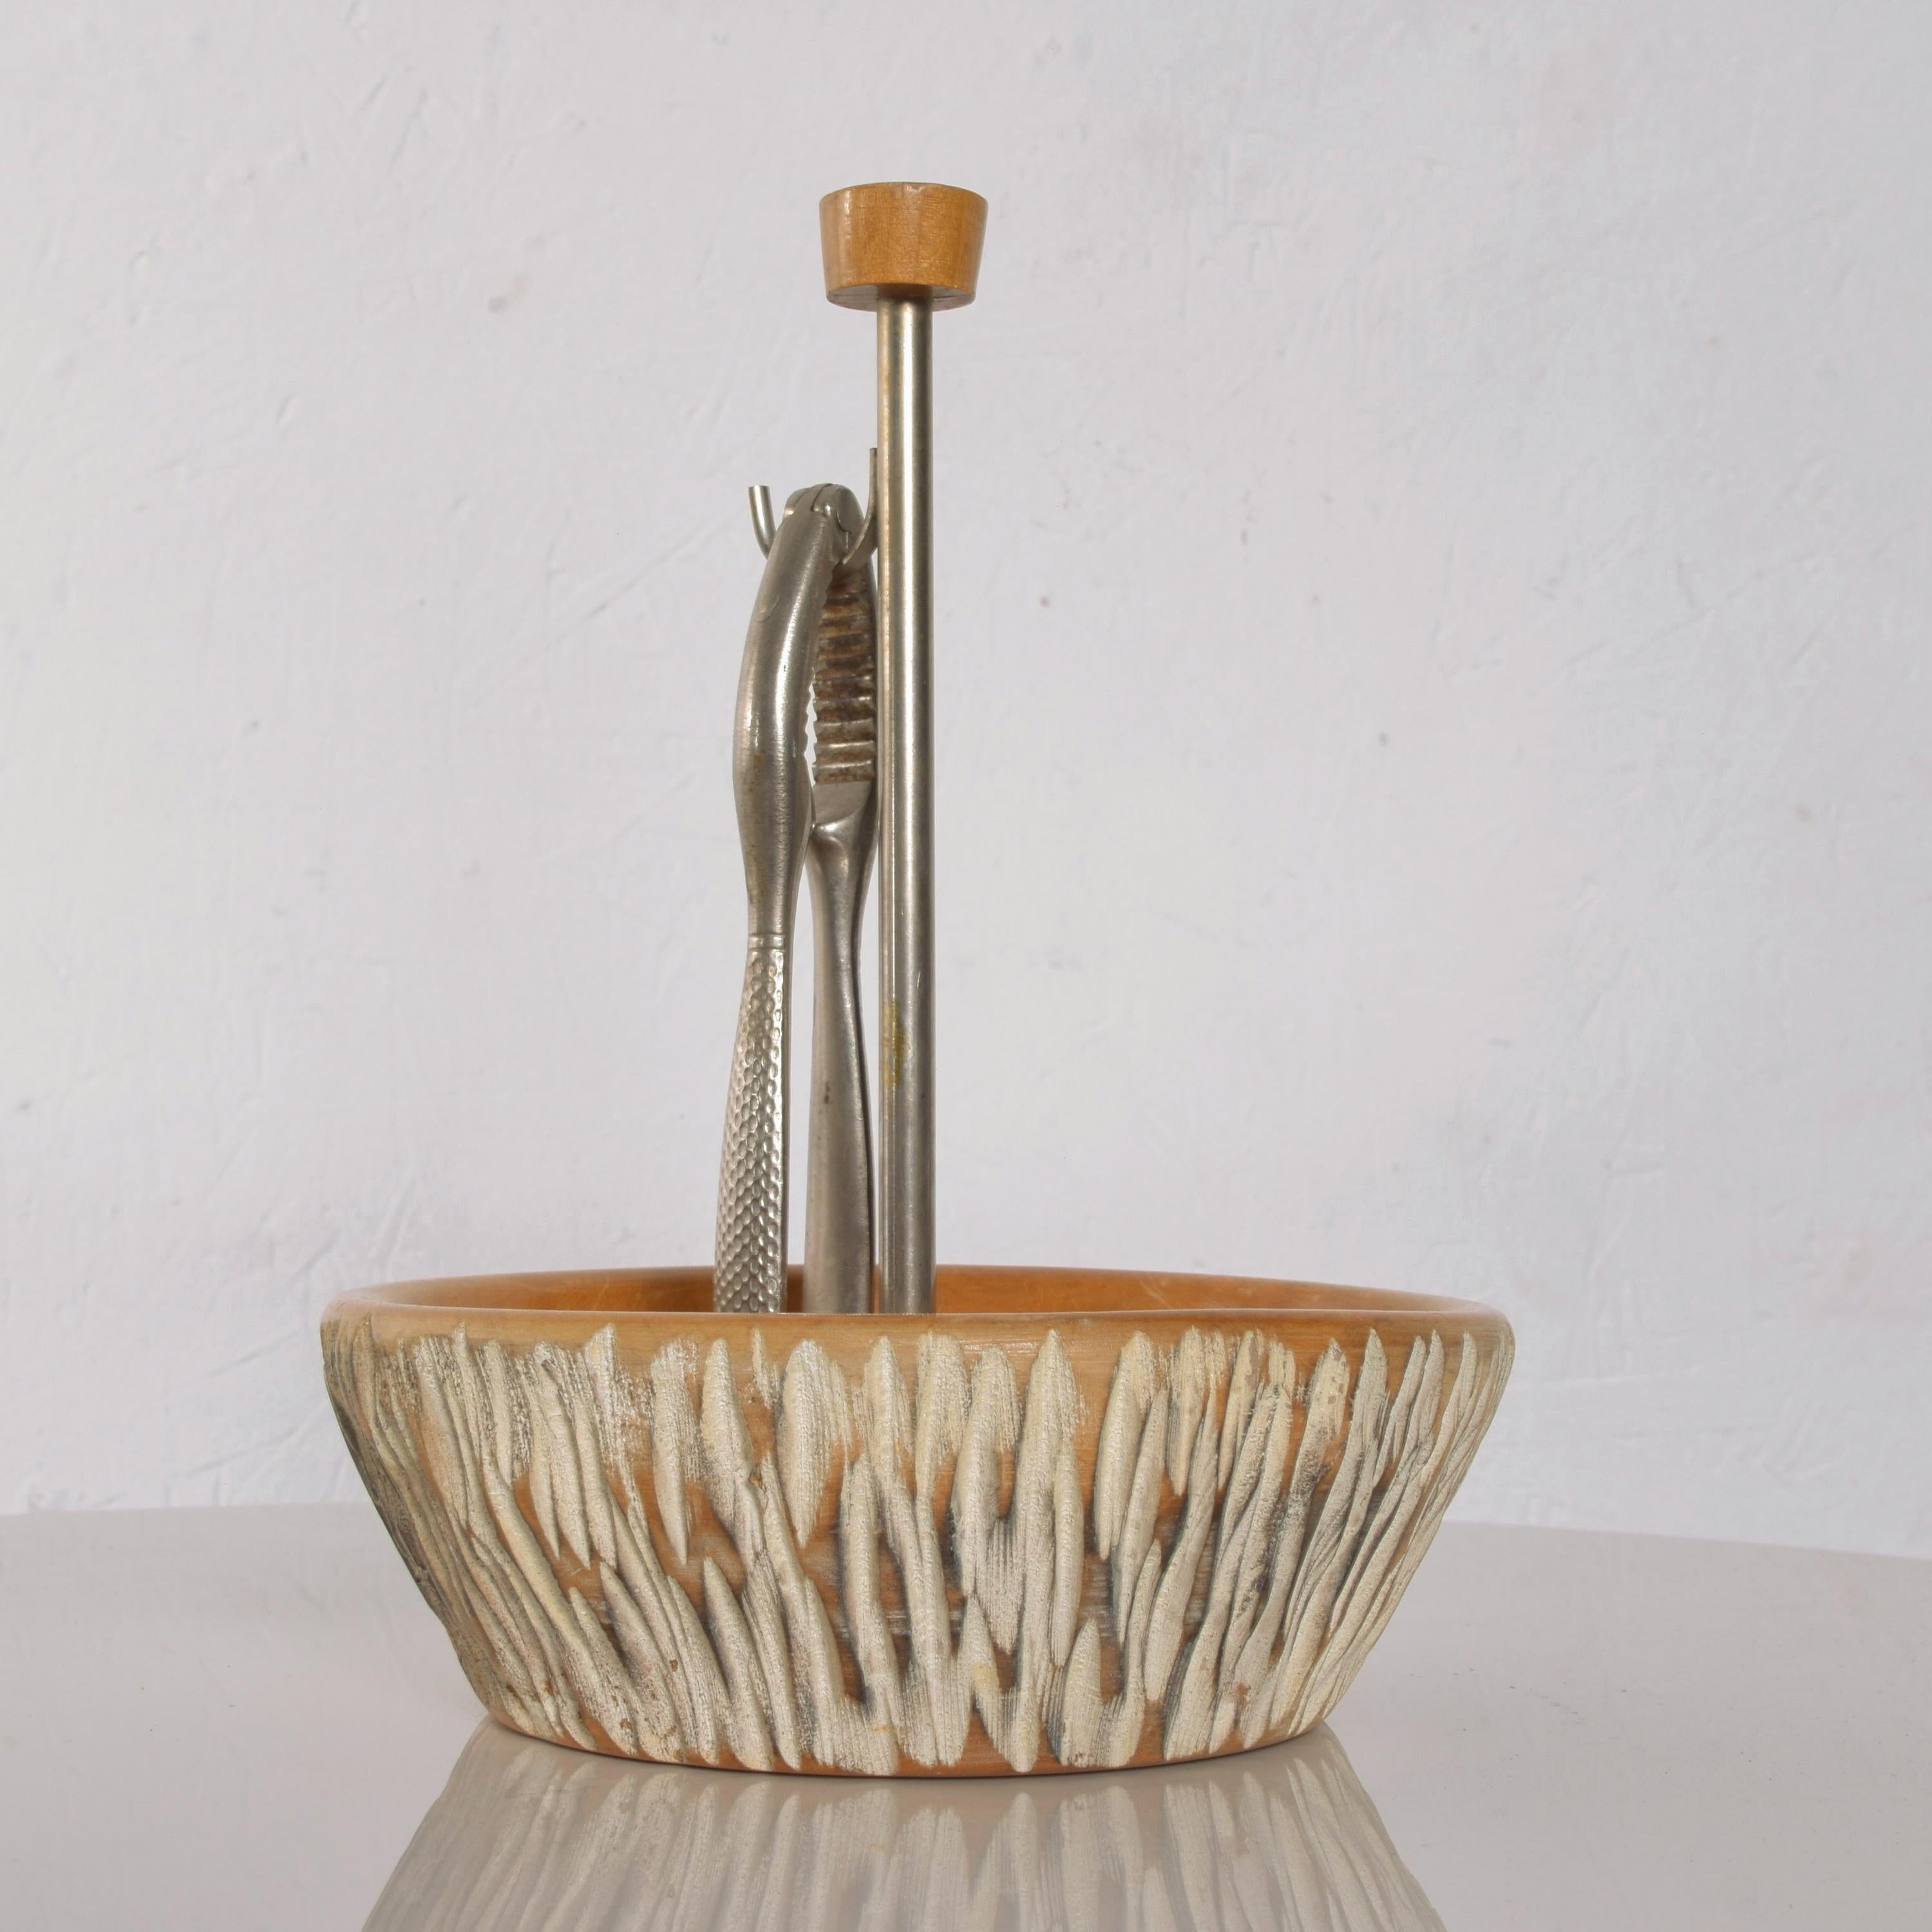 Mid-Century Modern Aldo Tura Macabo Sculptural Wood Nutcracker Dish with Stainless Tool 1960s Italy